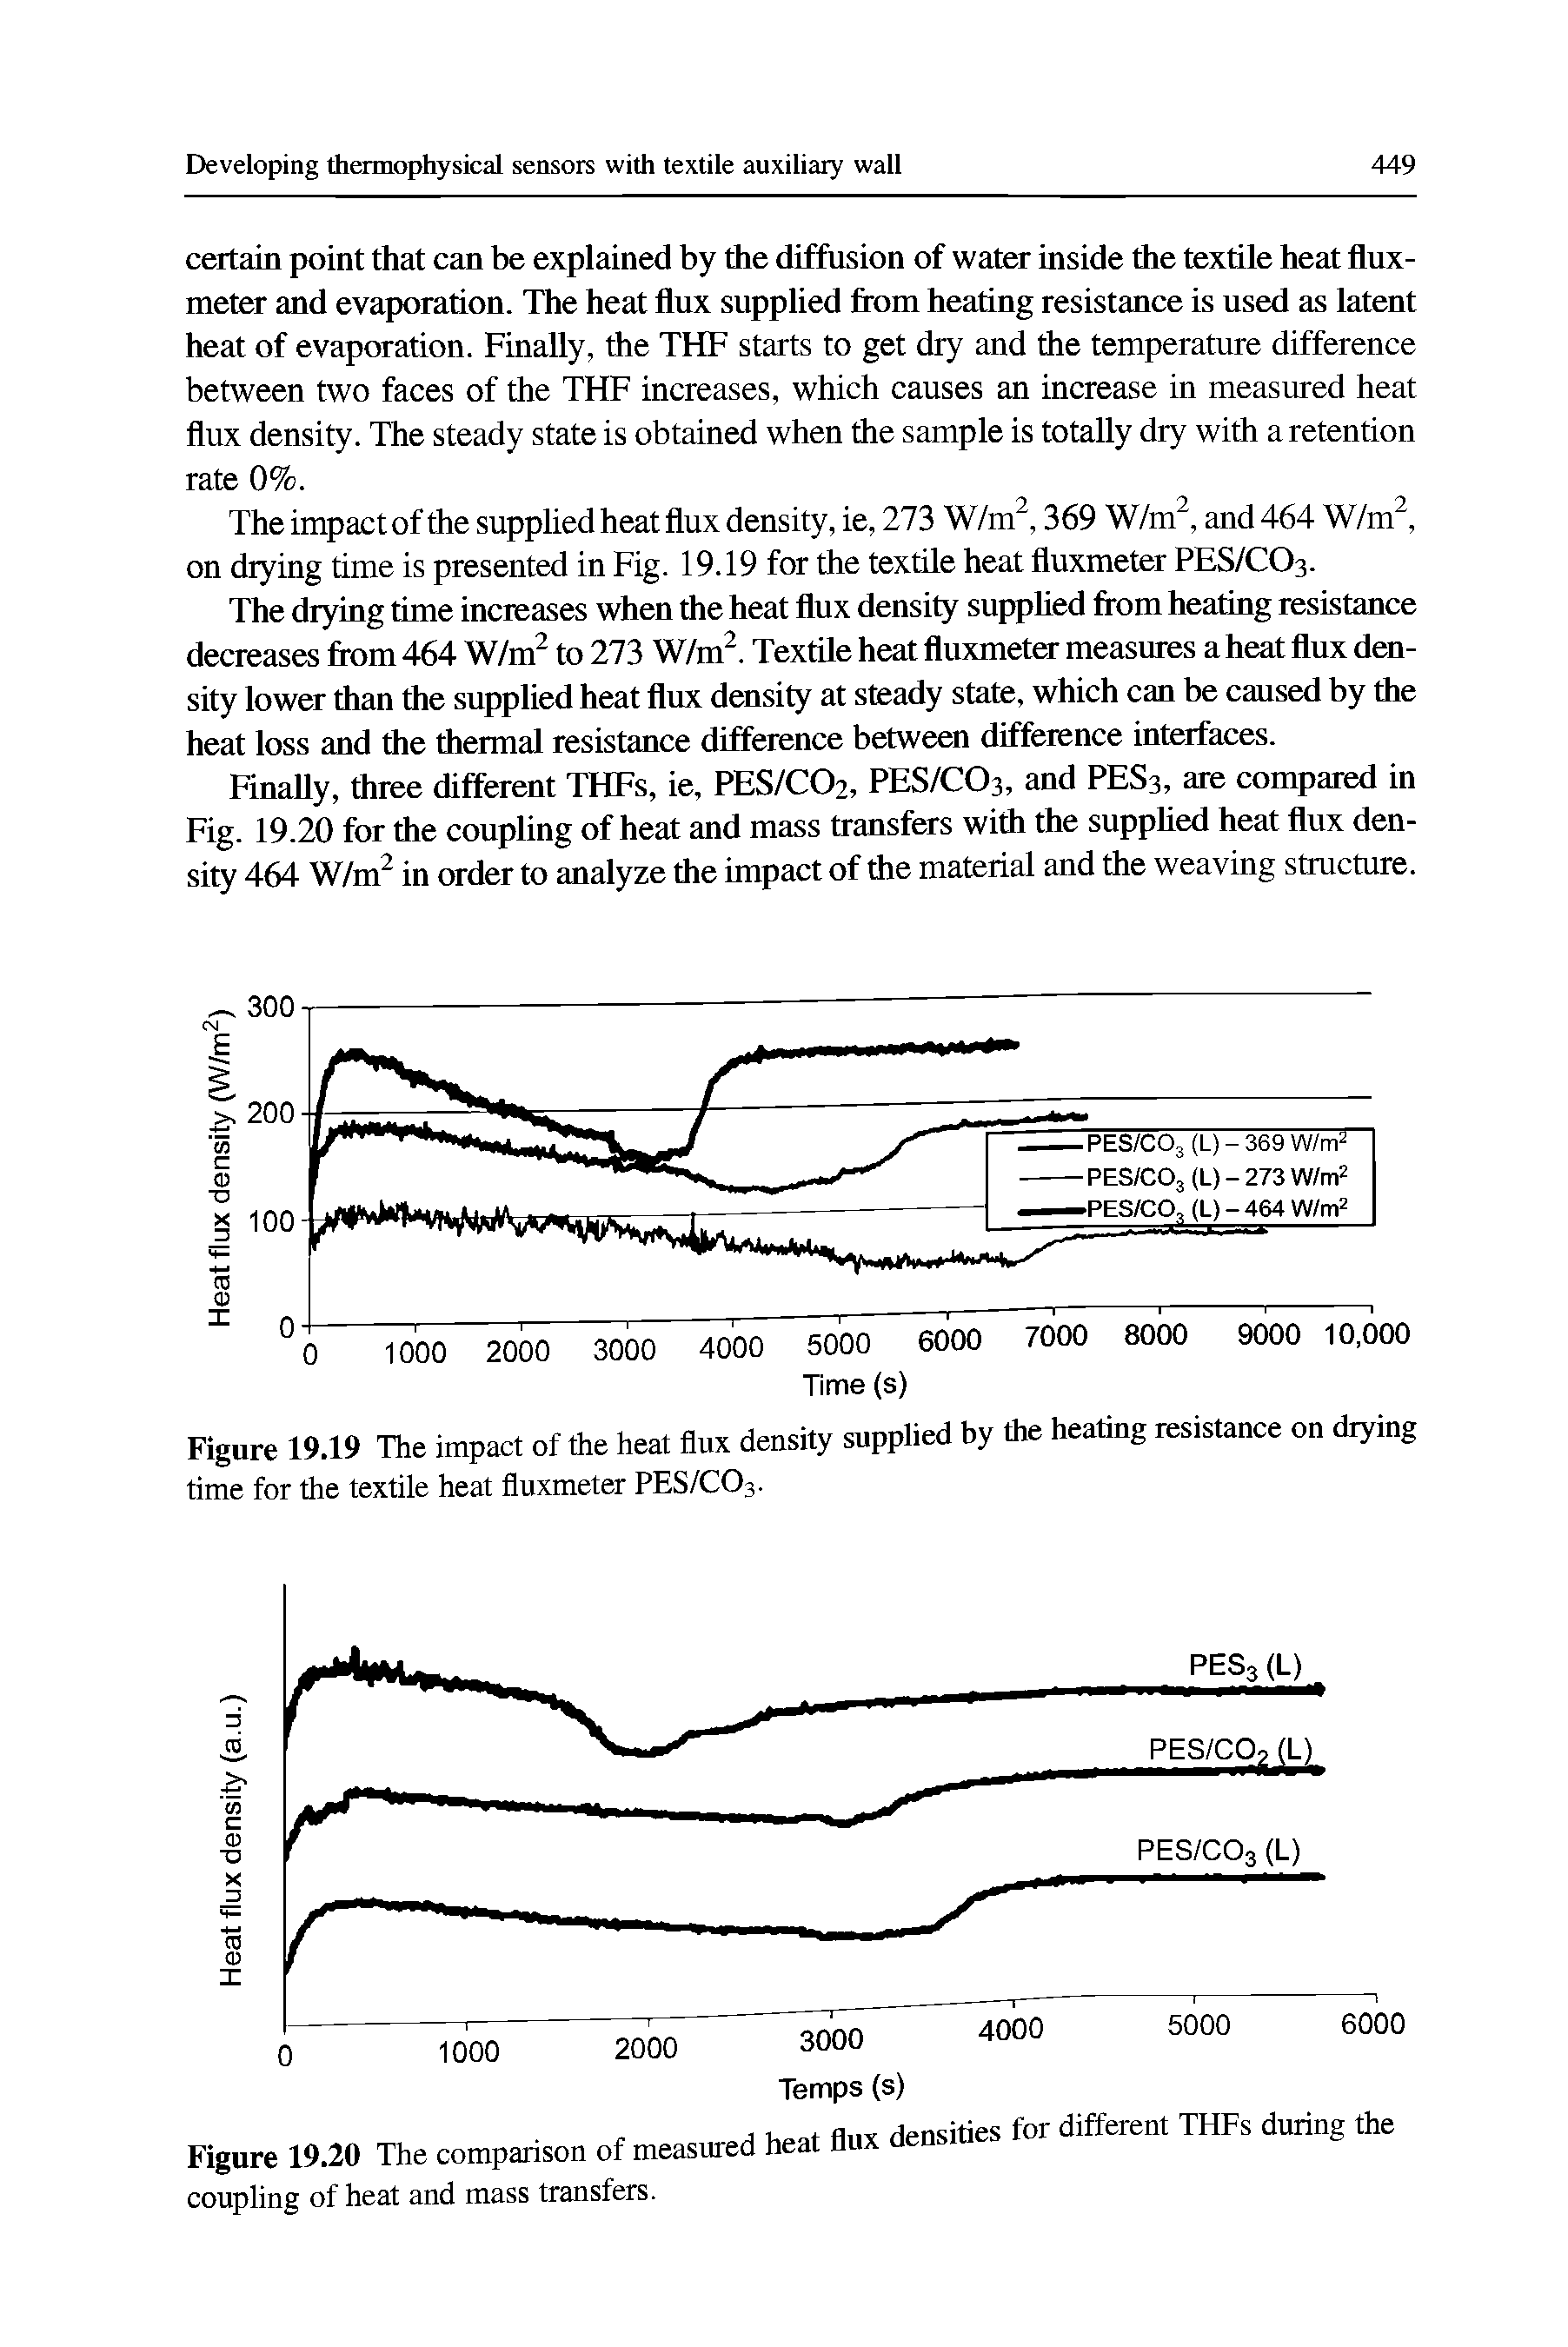 Figure 19.19 The impact of the heat flux density supplied hy the heating resistance on drying time for the textile heat fluxmeter PES/CO3.